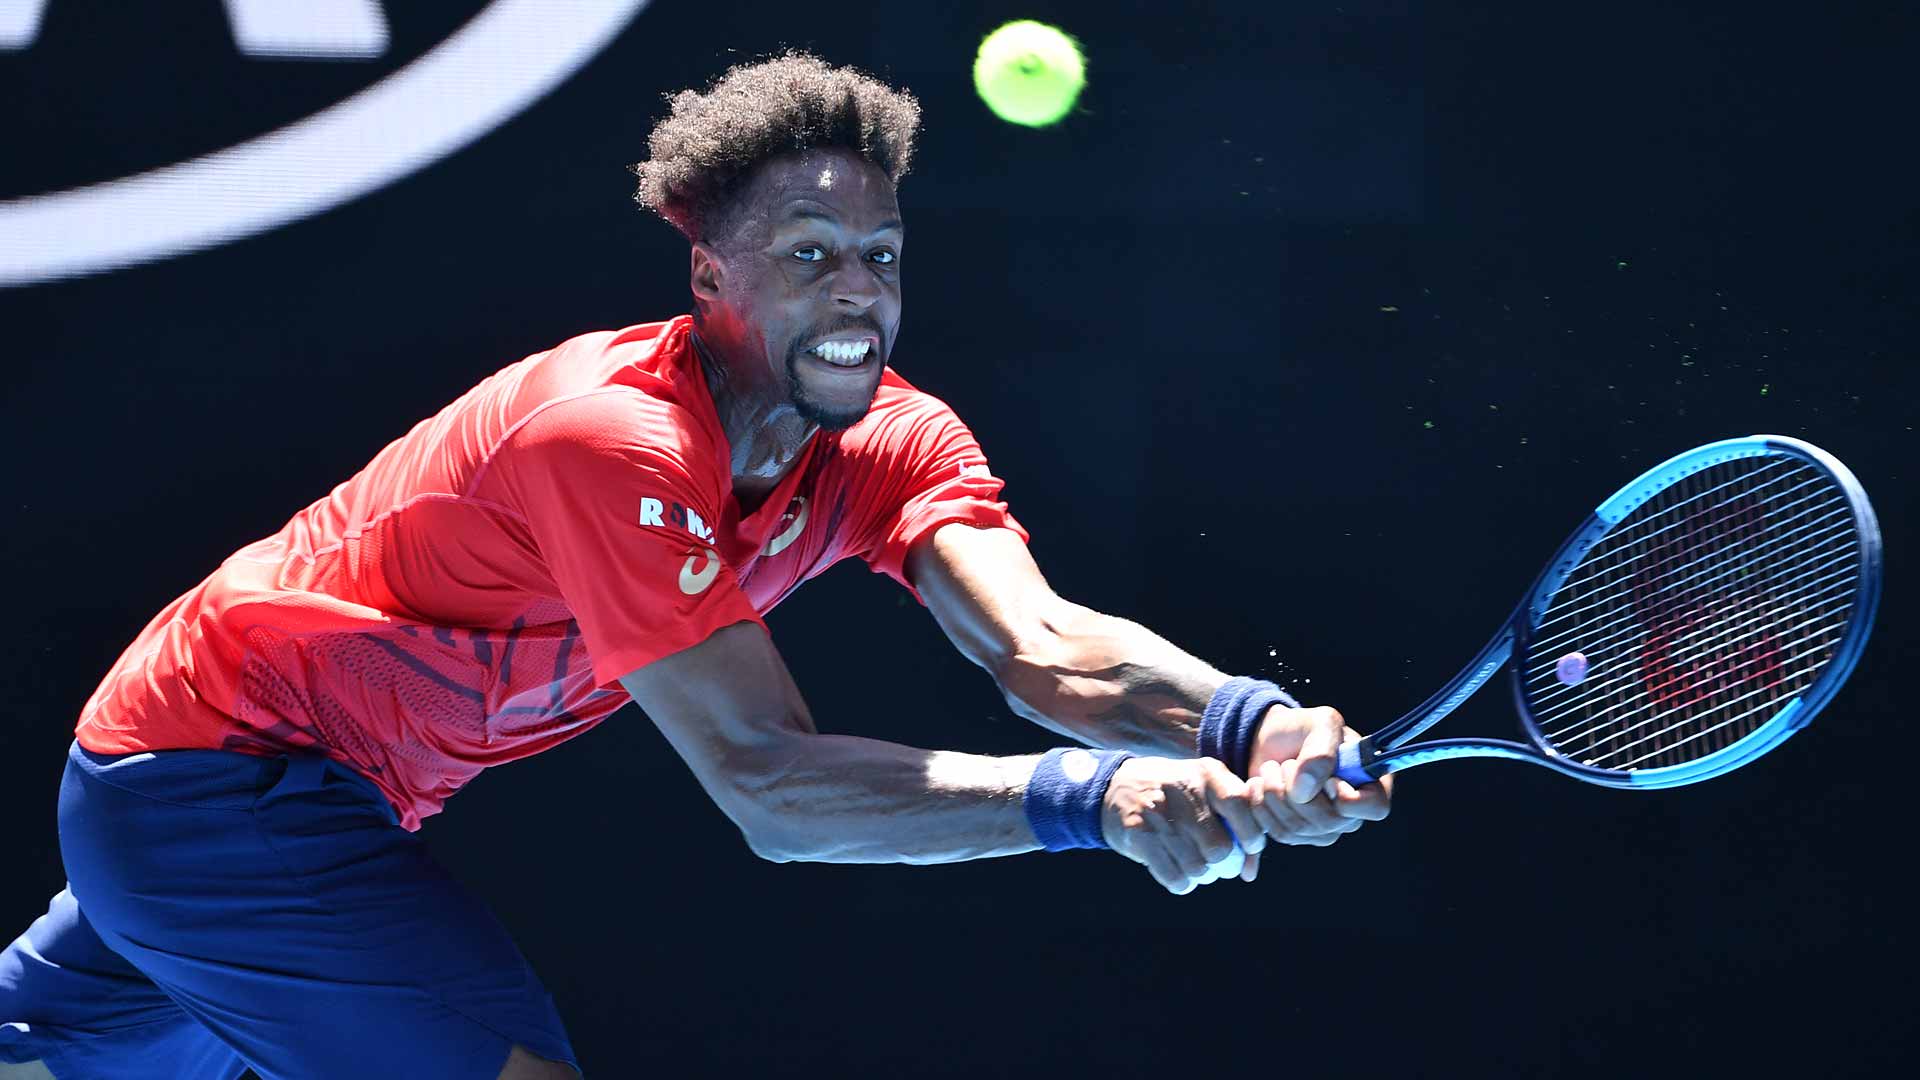 Monfils suffers racist abuse after Rome loss - Tennis News